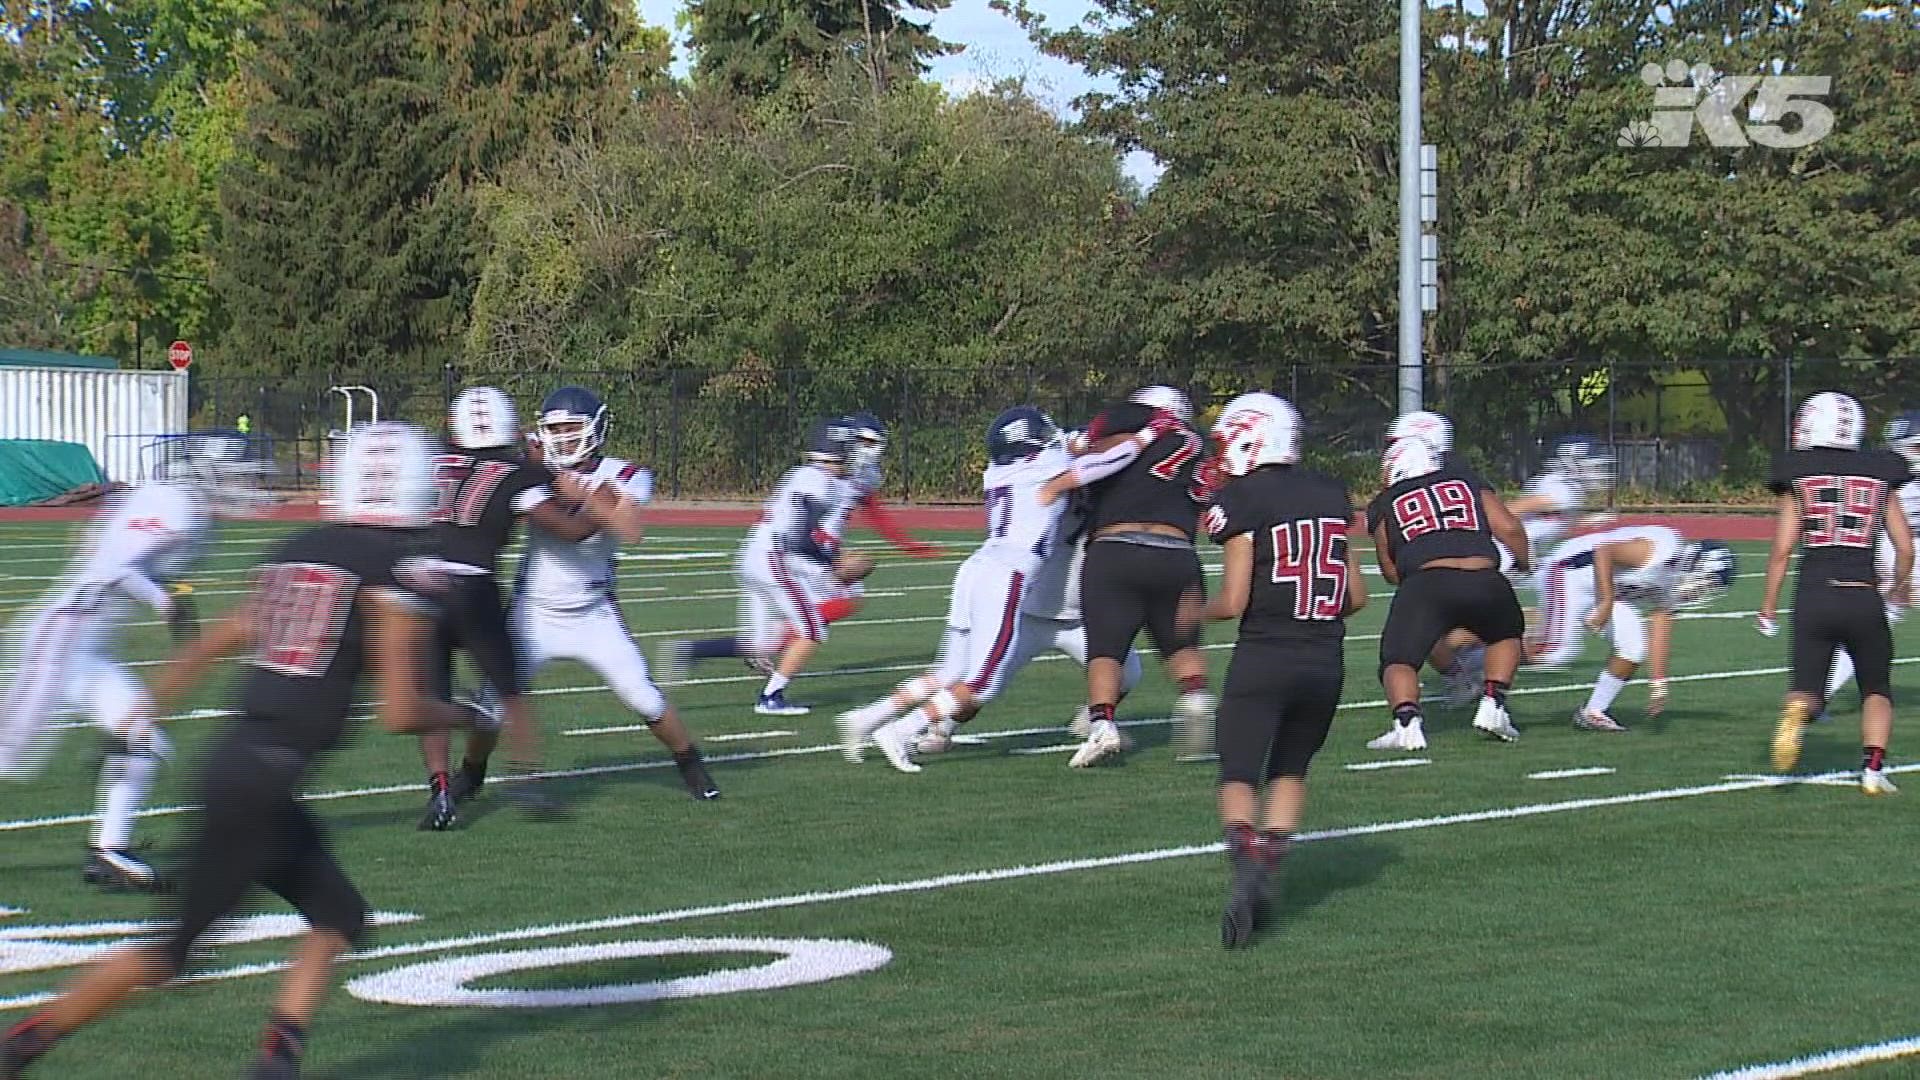 Highlights of Nathan Hale's 40-6 win over Cleveland